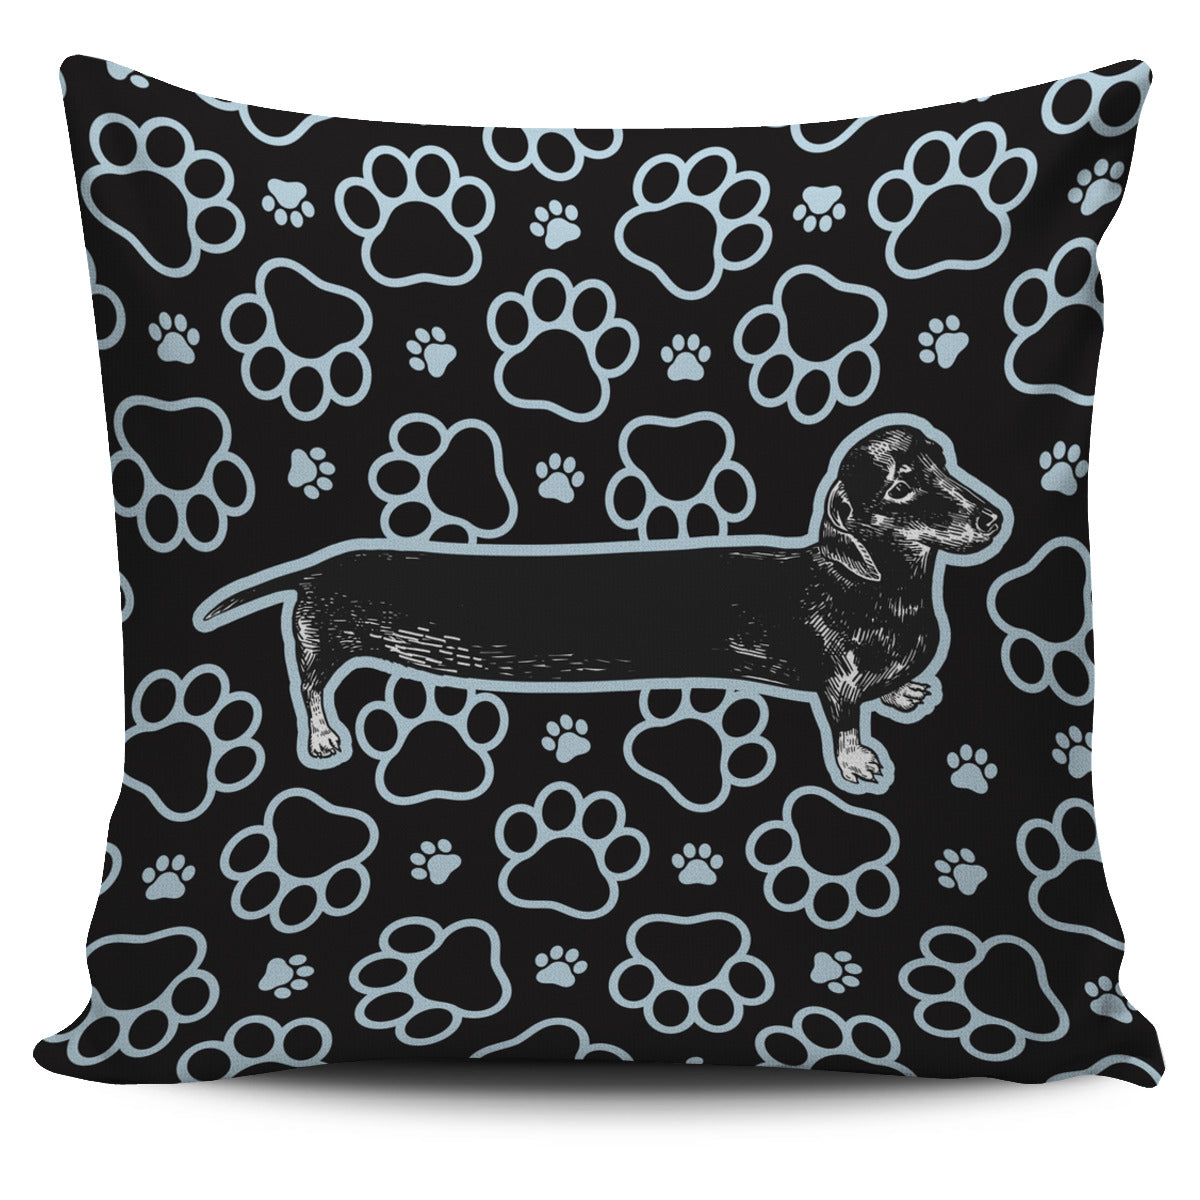 Vintage Dachshund Pillow Cover